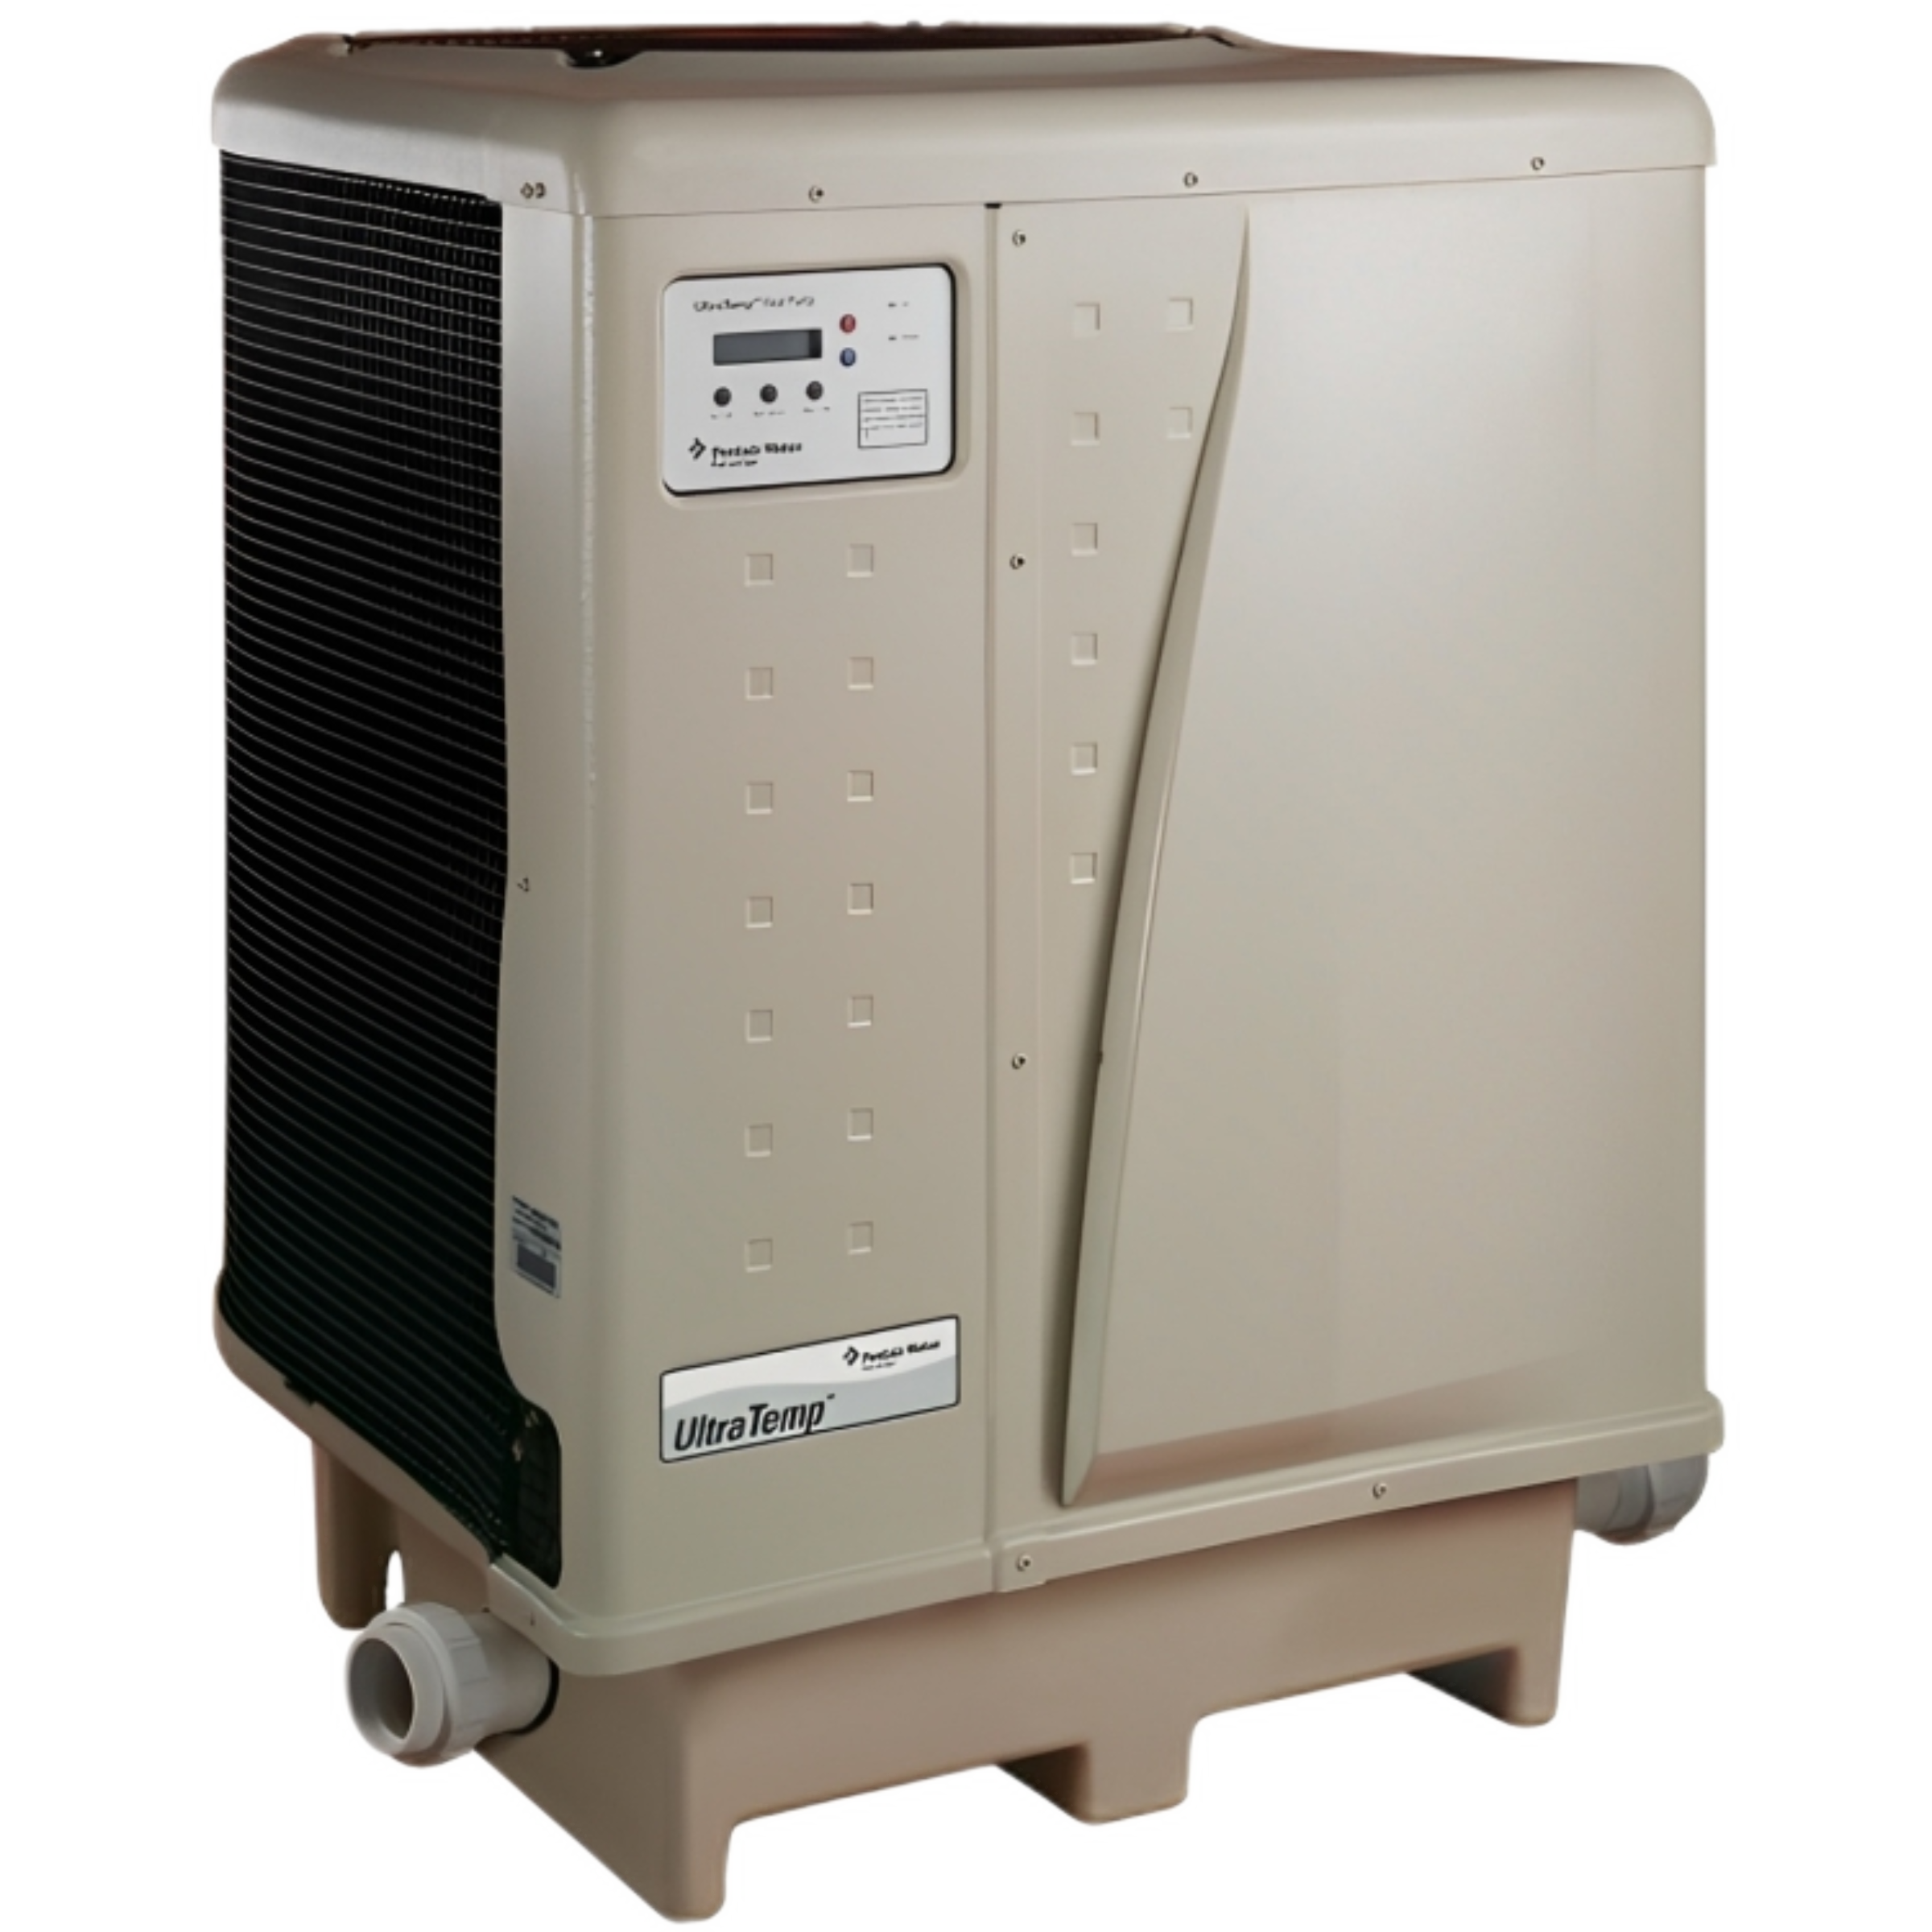 460833 PENTAIR UltraTemp 120Q High Performance Pool Heat Pump, Color: Almond, 
SIMPLY THE MOST ECONOMICAL WAY TO HEAT POOLS AND SPAS